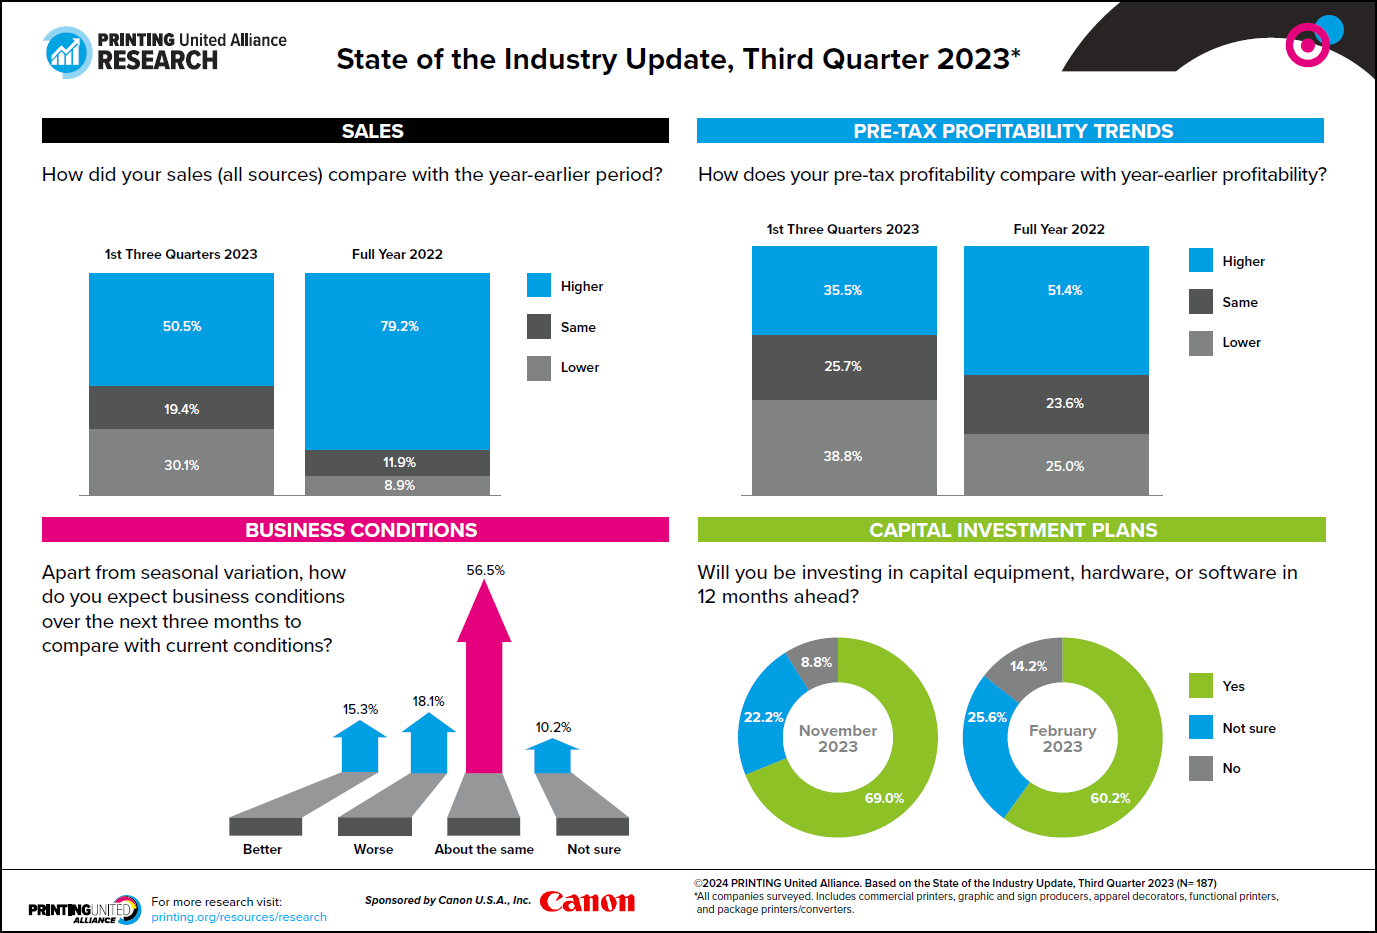 State of the Industry Update, Third Quarter, 2023